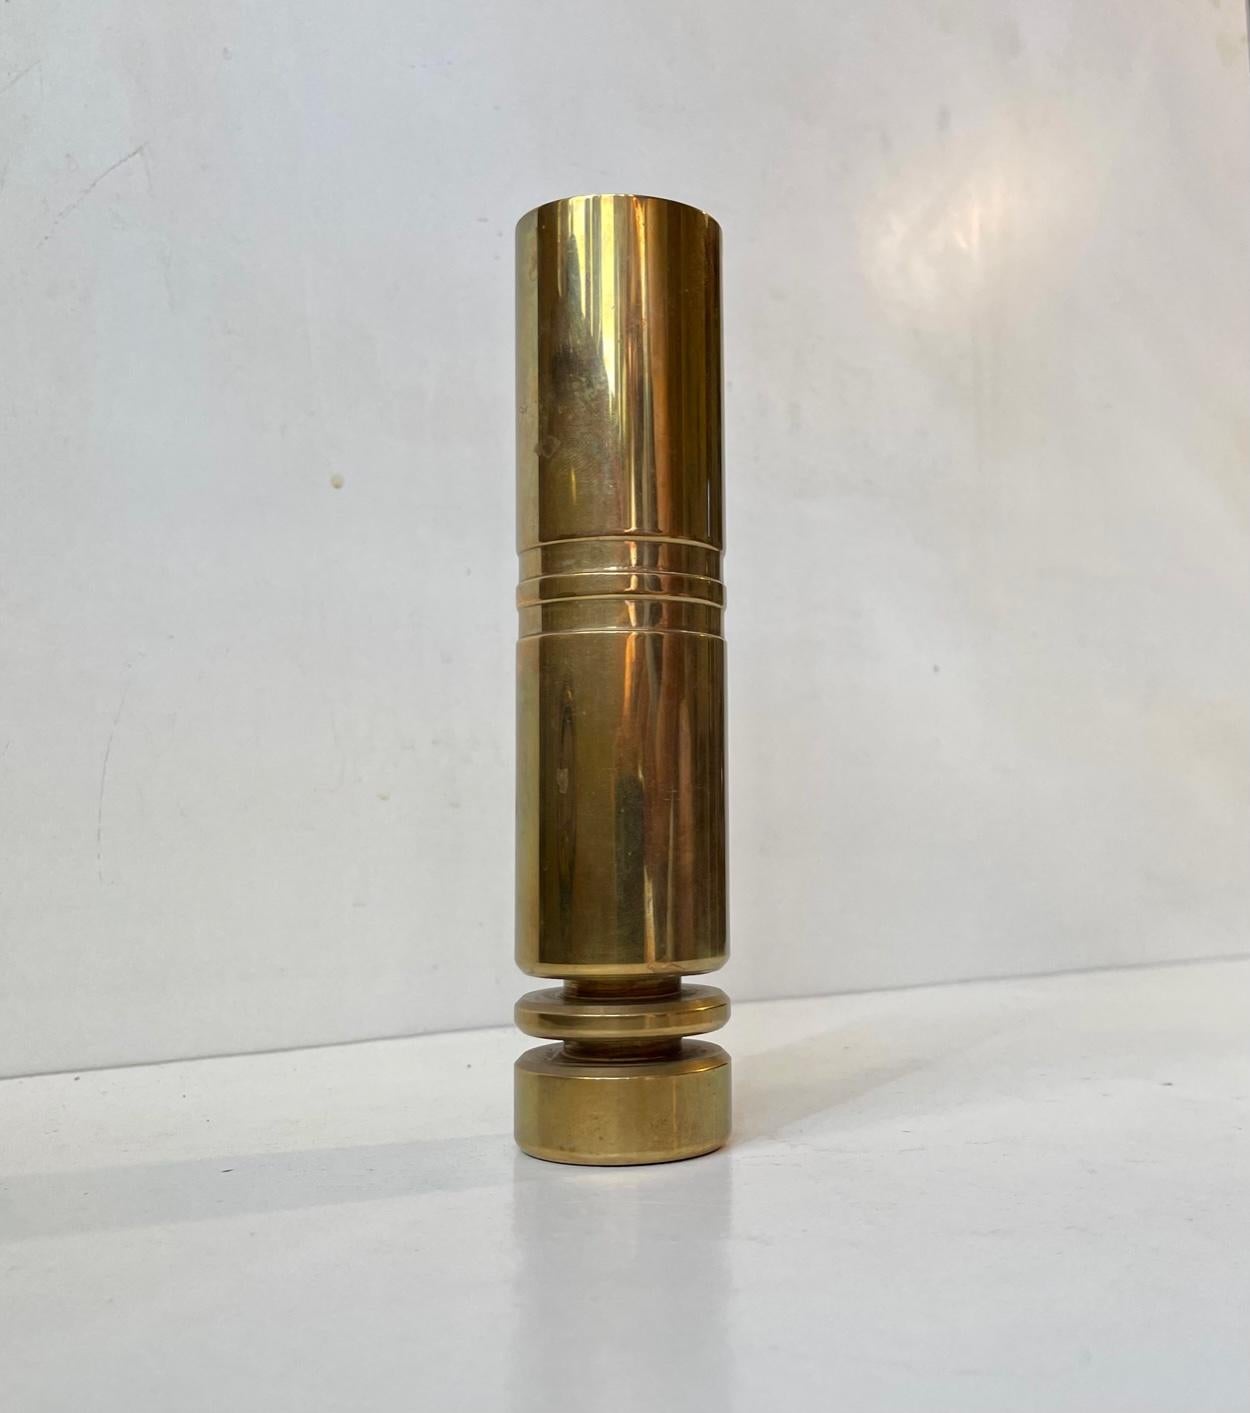 Heavy cylindrical Scandinavian vase in solid bronze. Horizontal ribbings/tiers towards its base and two center stripes - incised/engine-turned. Unknown Scandinavian maker/designer in the style of Pierre Forsell. Measurements: H: 19 cm, Diameter: 4.5